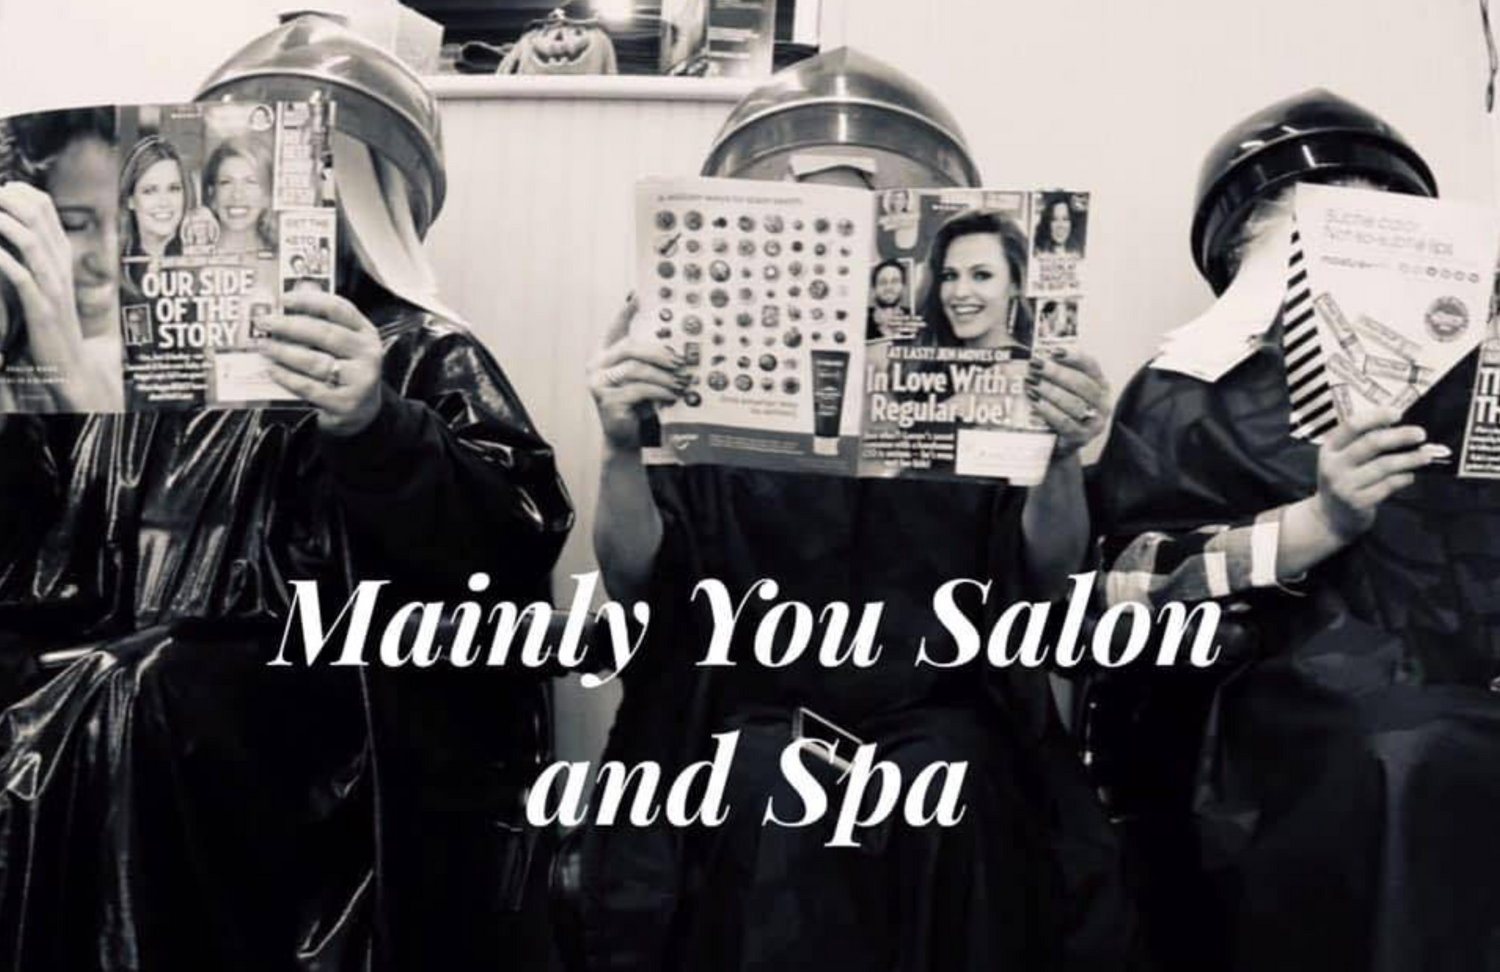 Mainly You Salon and Spa